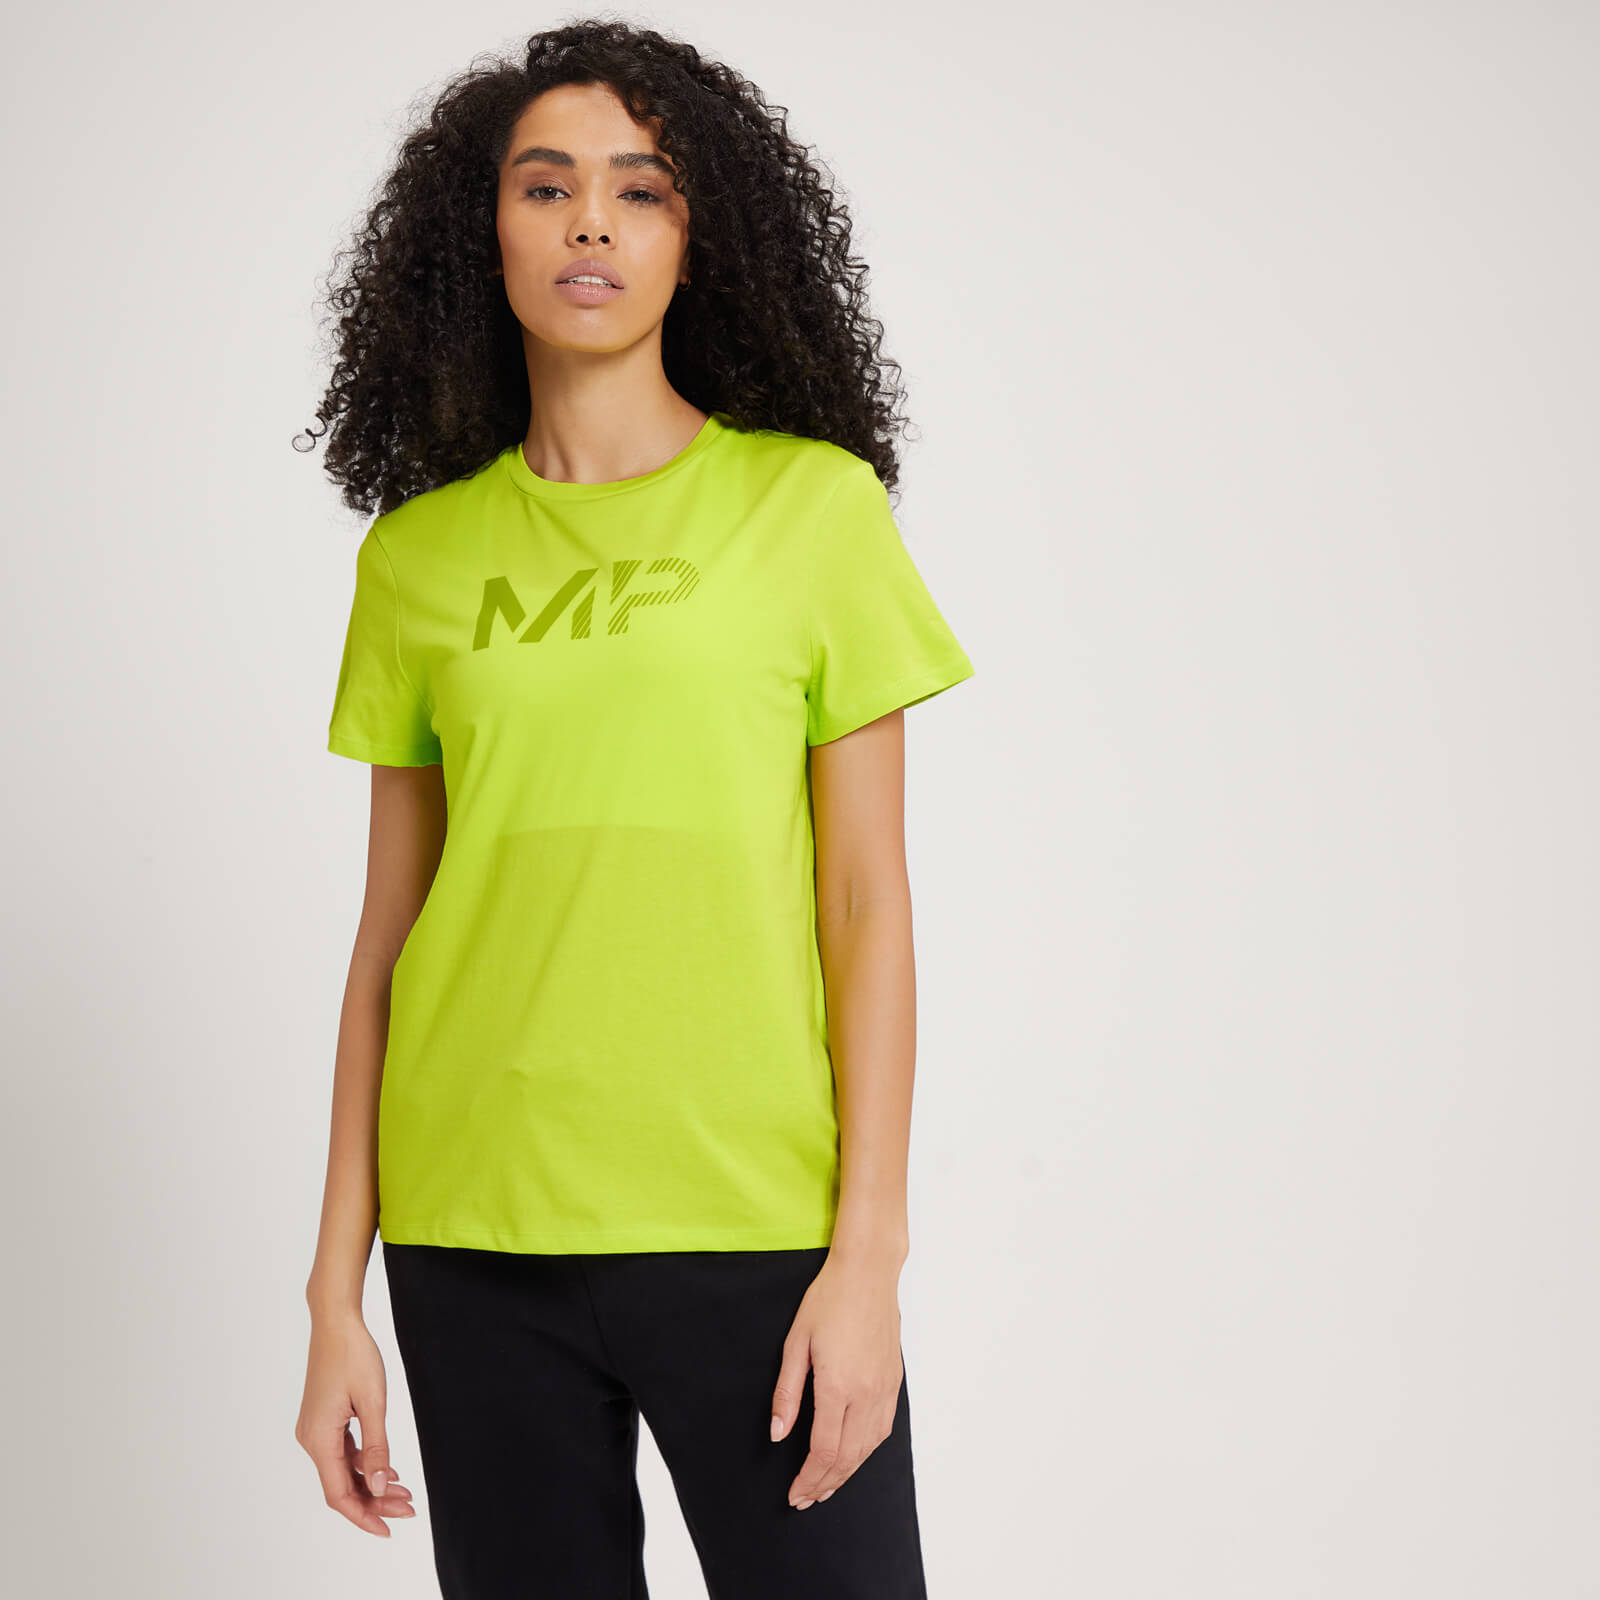 Myprotein UK MP Women's Fade Graphic T-Shirt - Lime - XS